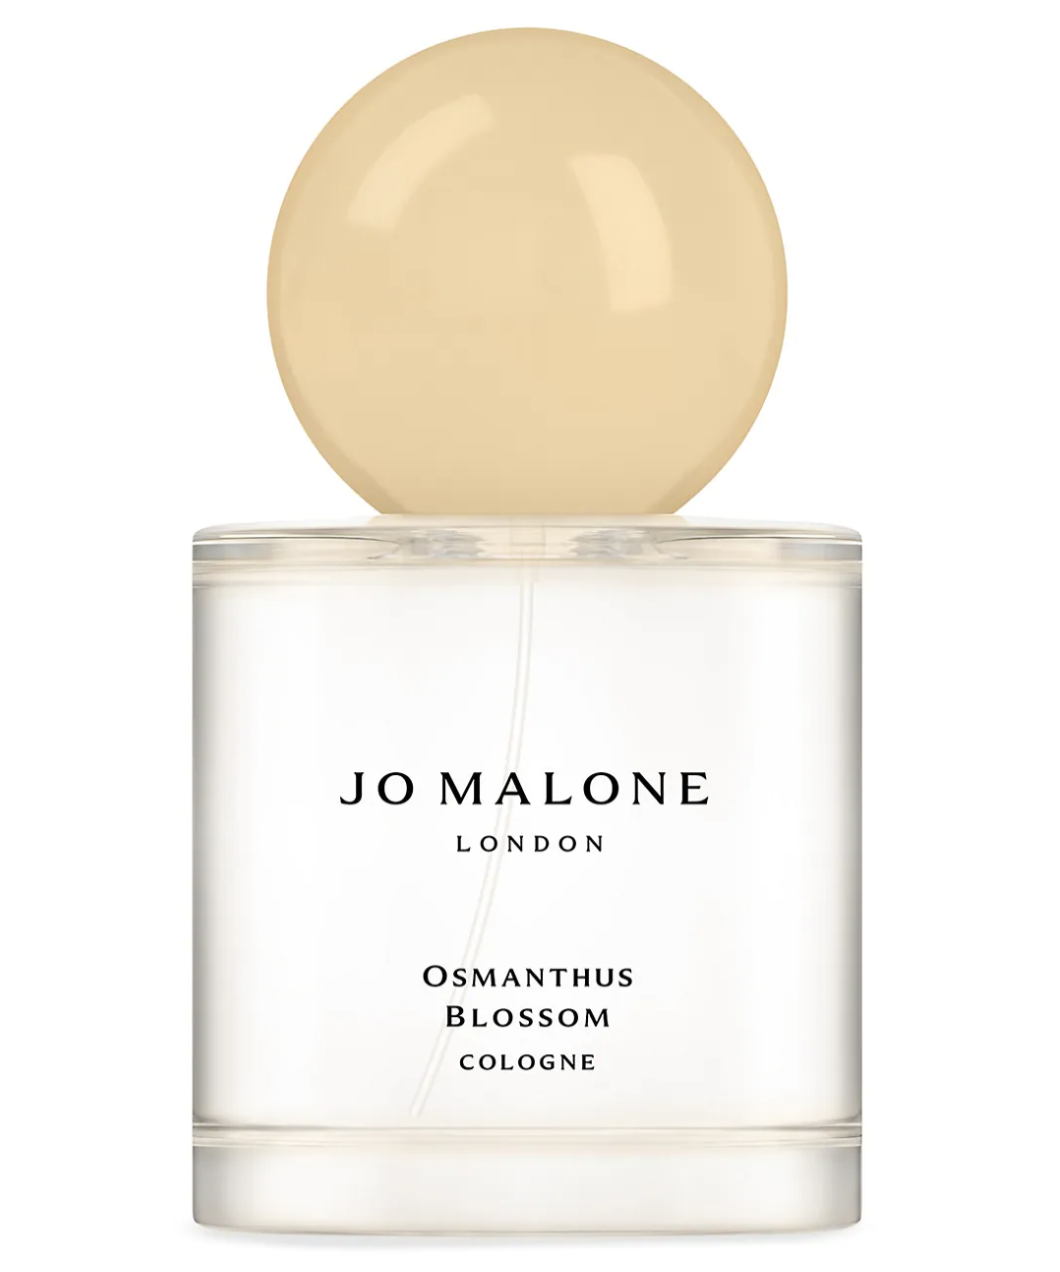 5-things-to-buy-in-the-month-of-March-jo-malone-cheap-fragrance-buy-online